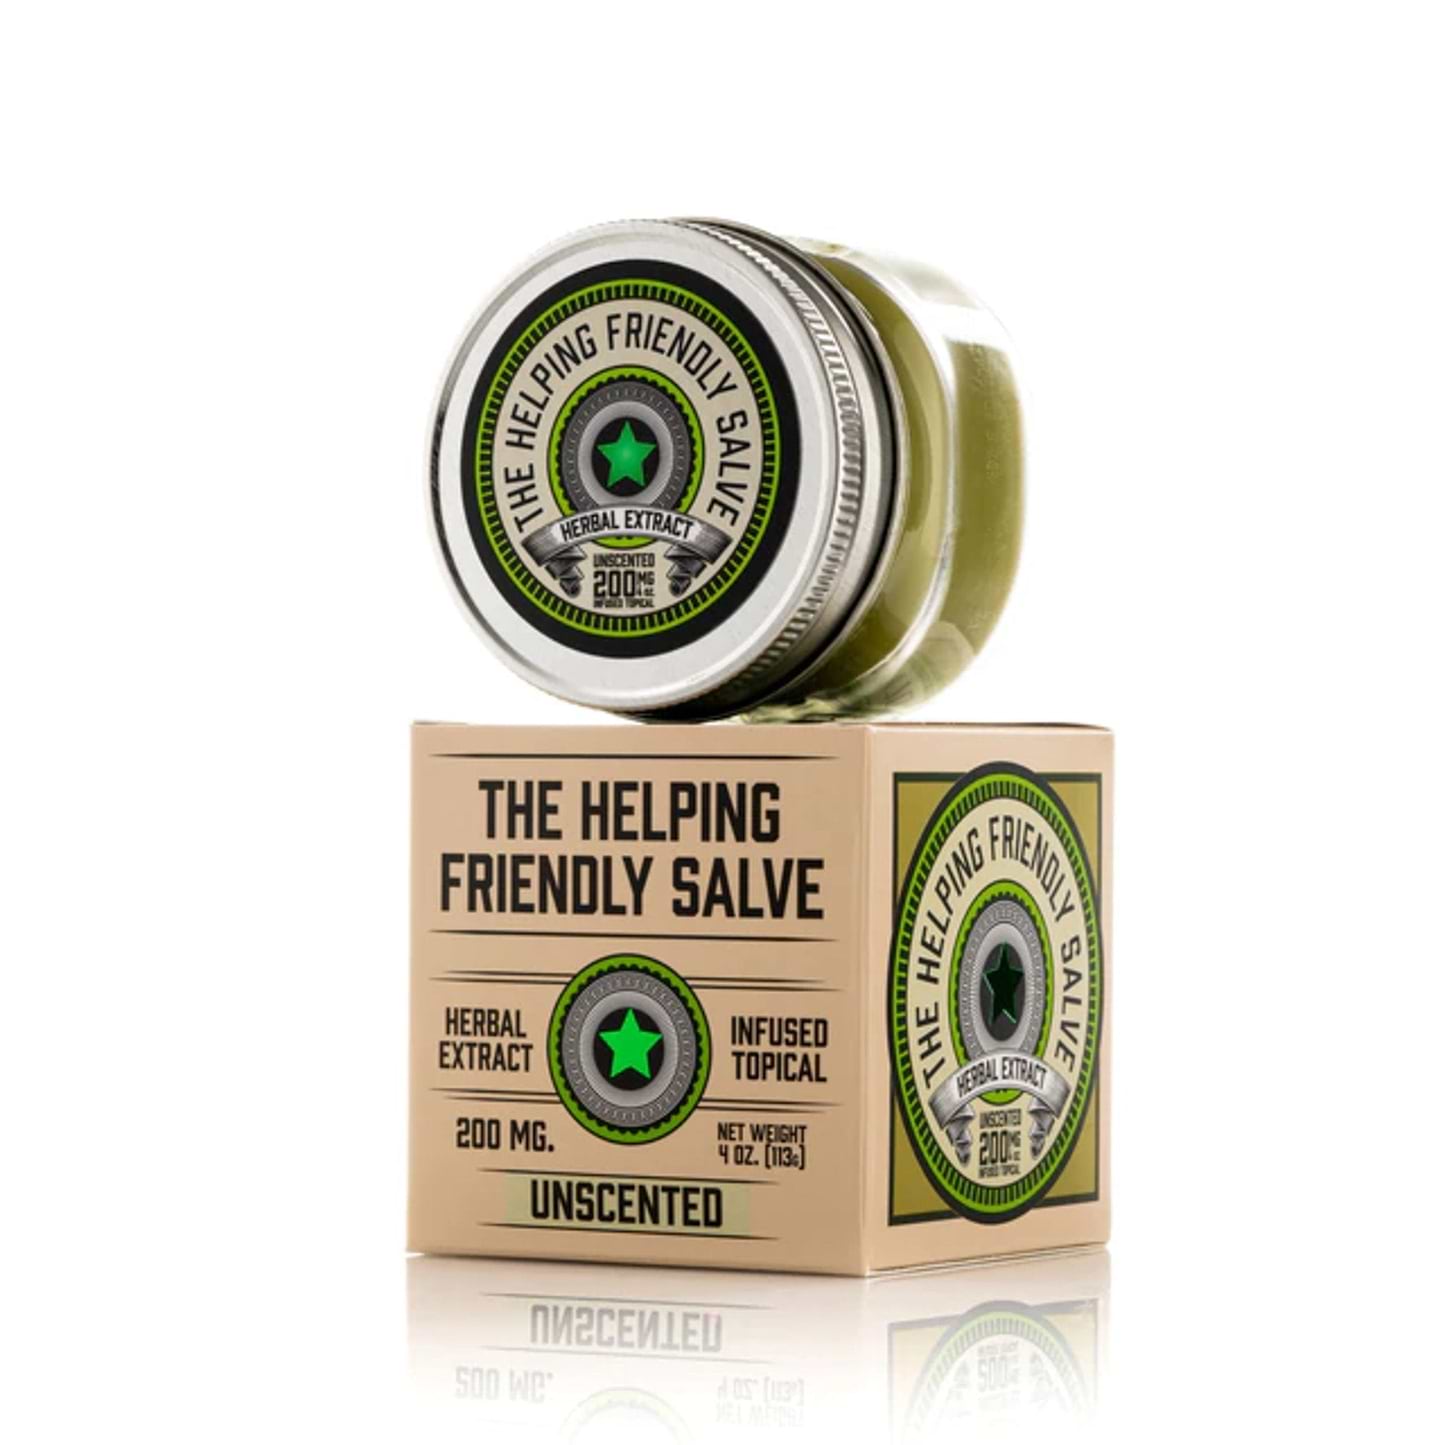 The Helping Friendly Herbal Extract Topical - 200mg 200mg / Unscented